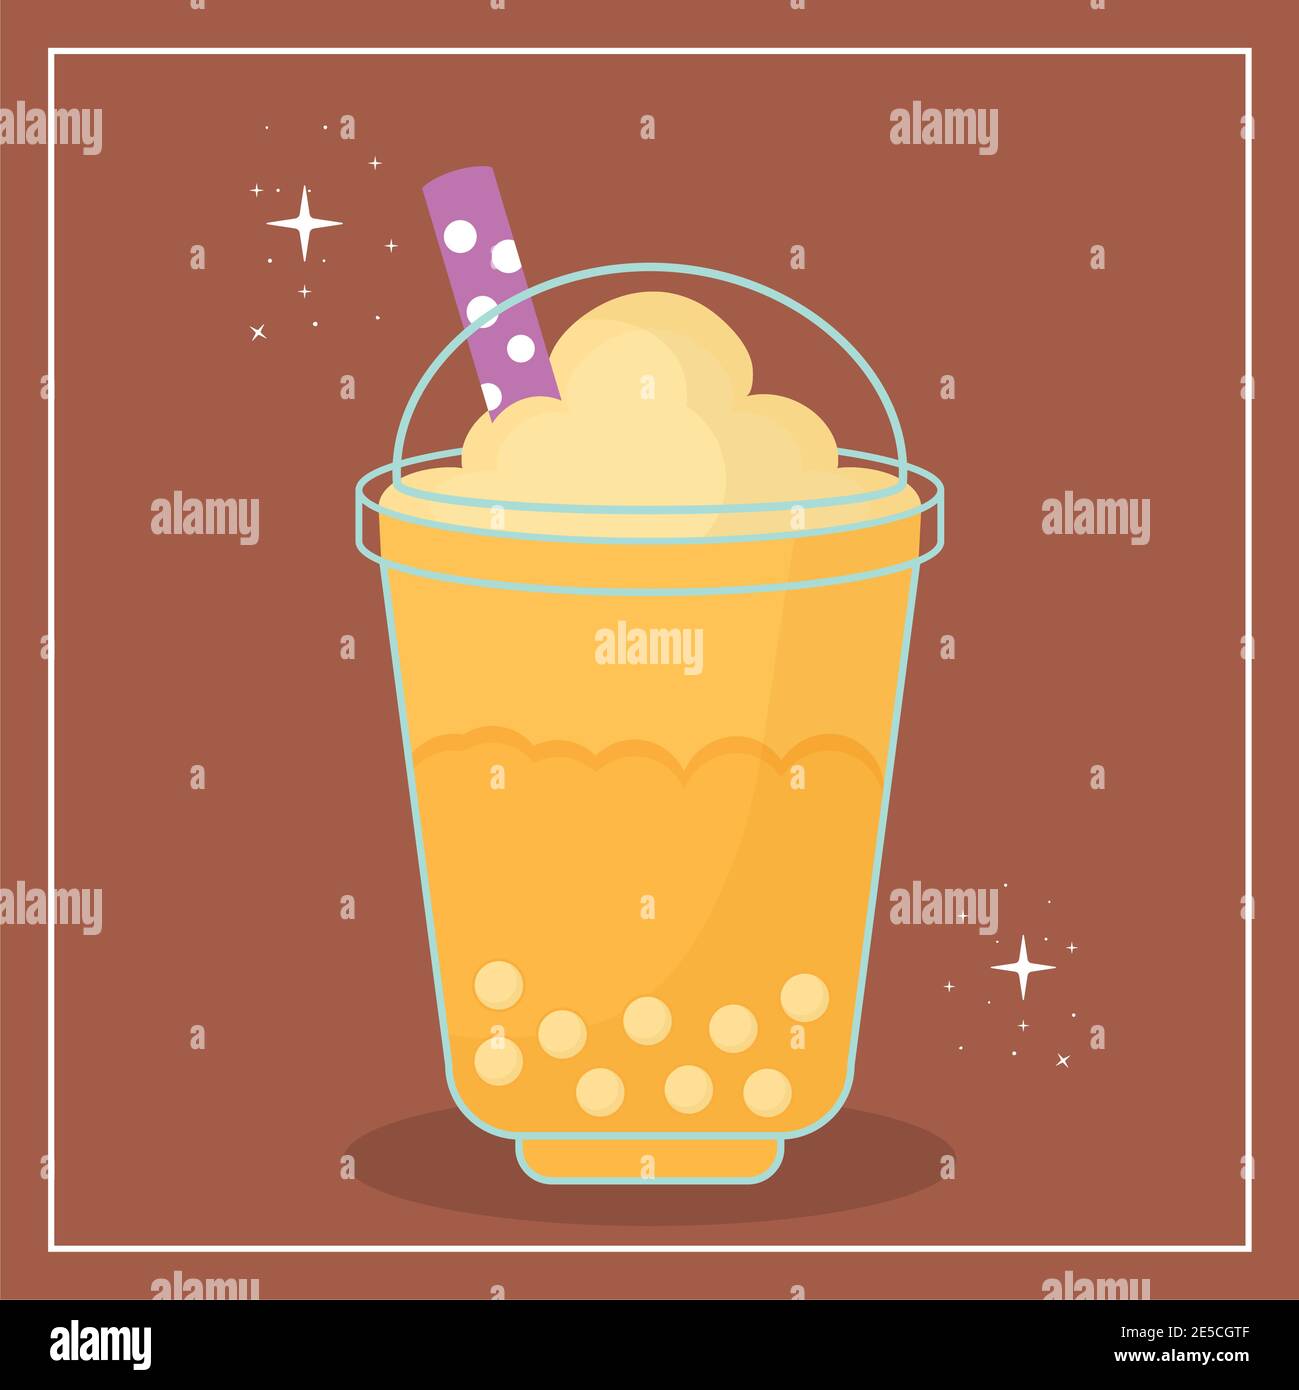 https://c8.alamy.com/comp/2E5CGTF/asian-taiwanese-drink-with-a-yellow-color-and-bubbles-on-a-brown-background-2E5CGTF.jpg